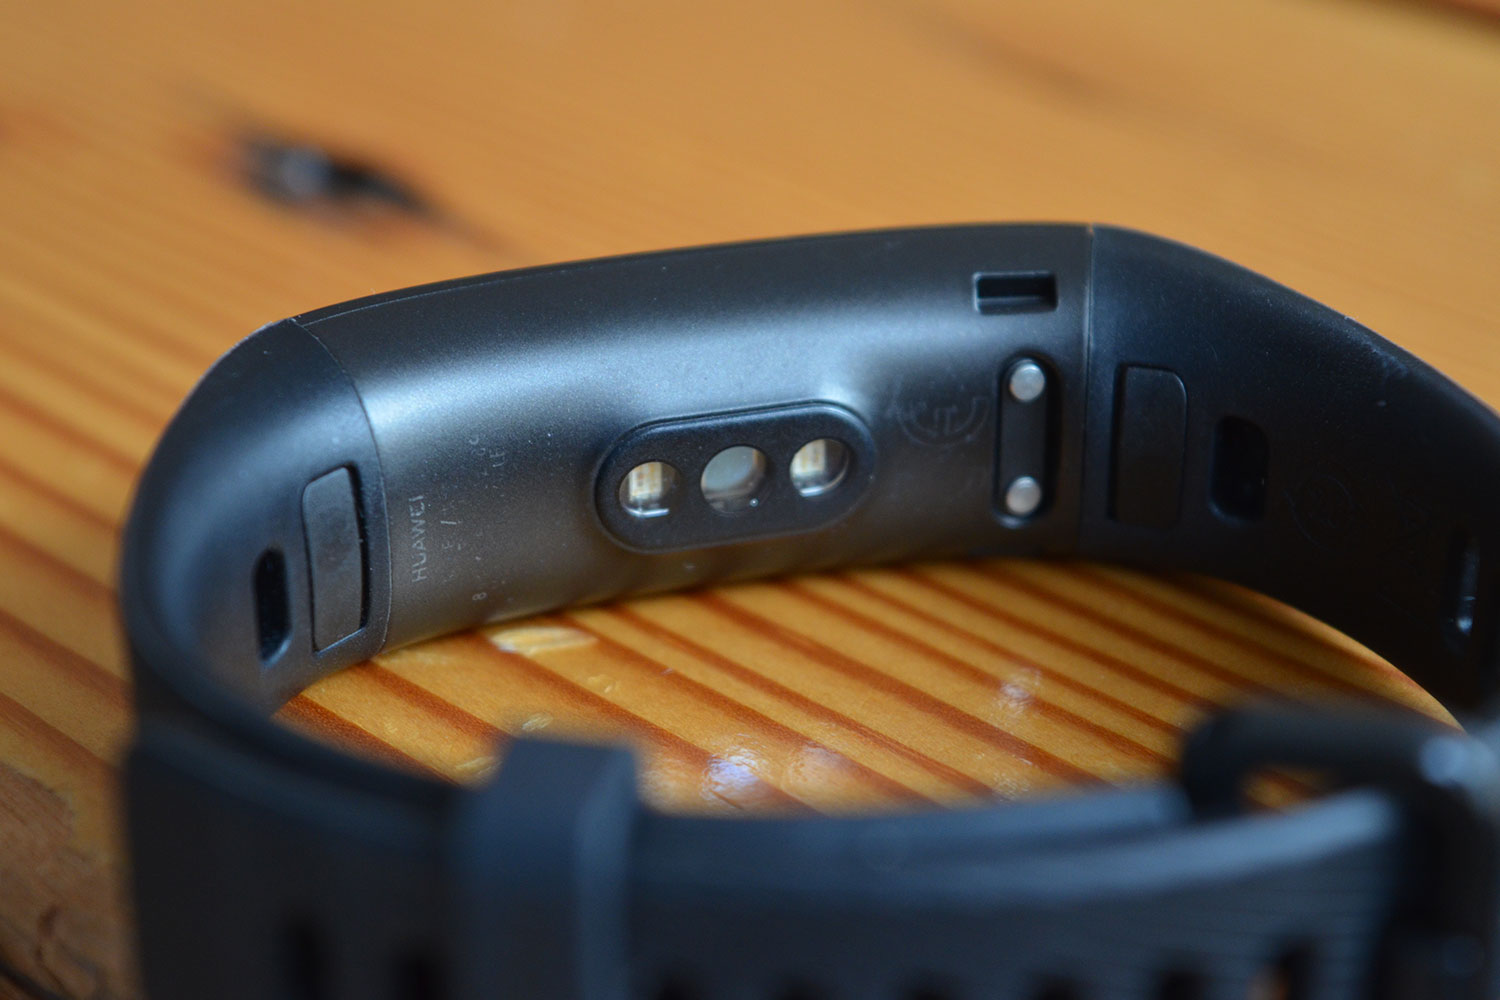 Huawei Honor Band 4 and Band 3 Pro appear with heartrate, color